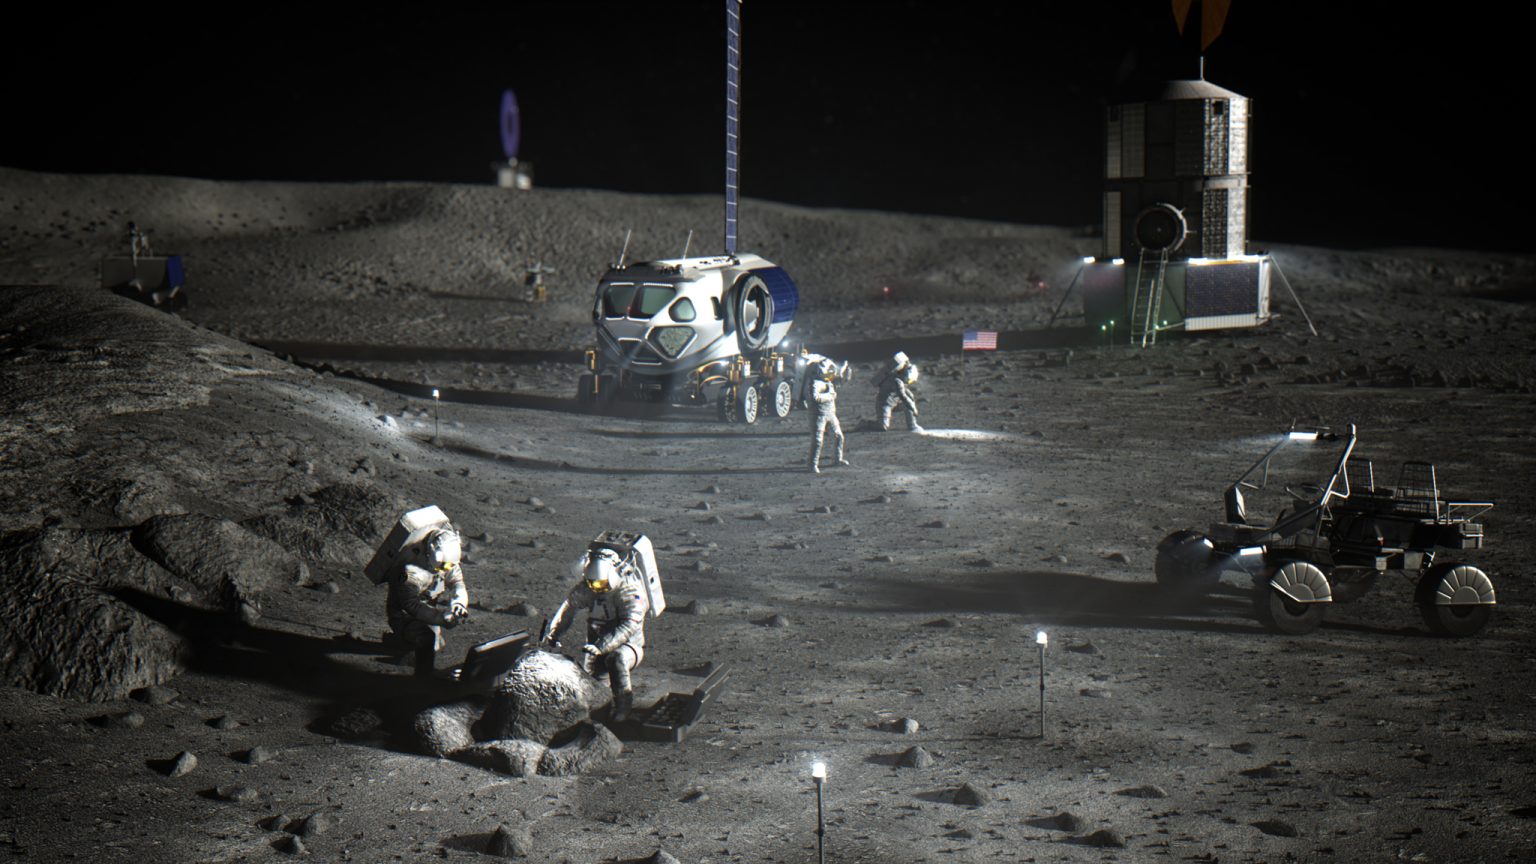 Will Artemis astronauts look for life on the moon?